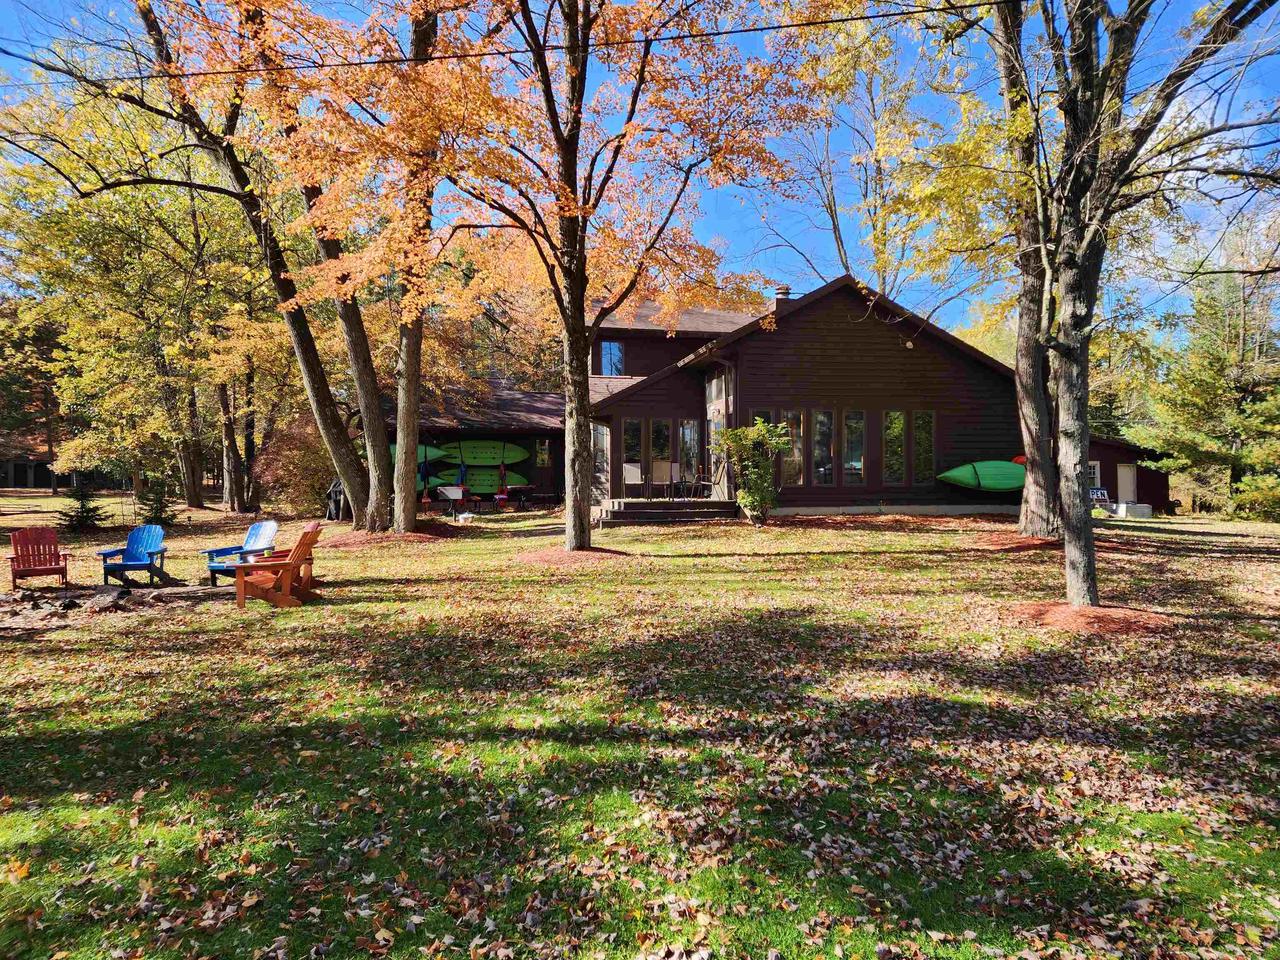 Listing picture for N2494 WHISPERING PINES ROAD in Waupaca